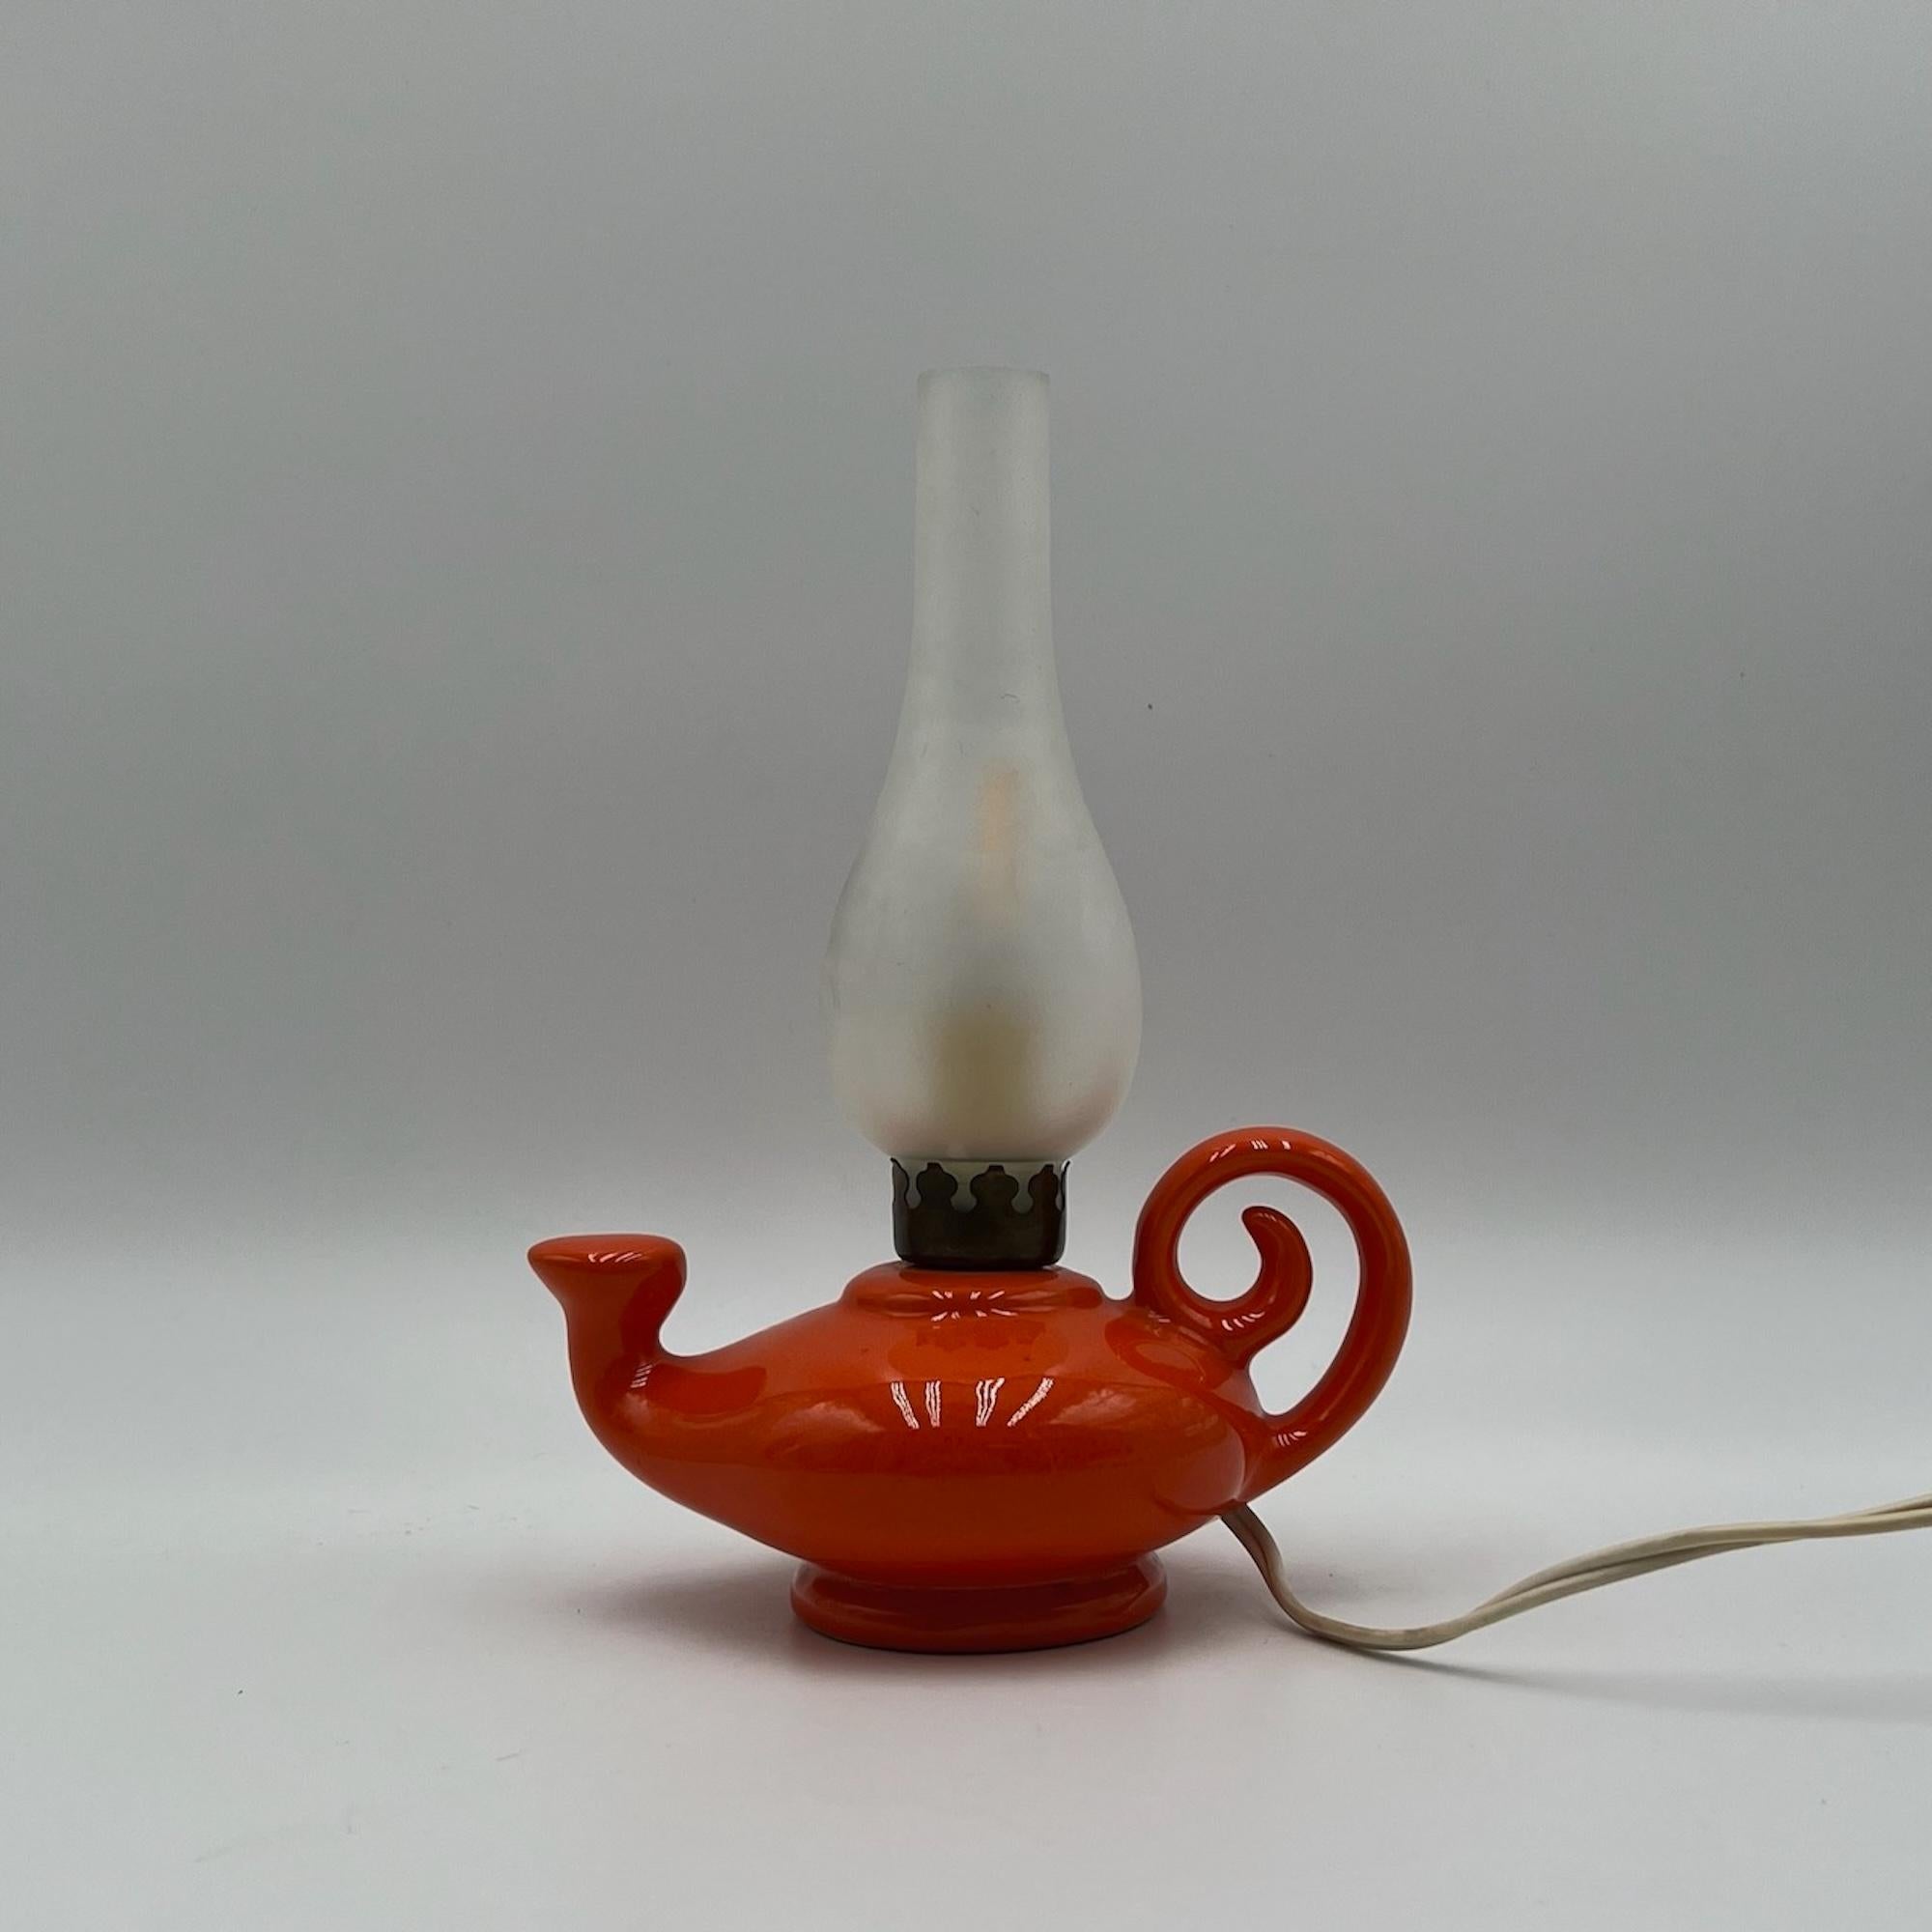 Italian Vintage Orange Ceramic and Glass Lamp Made in Italy, 1960s For Sale